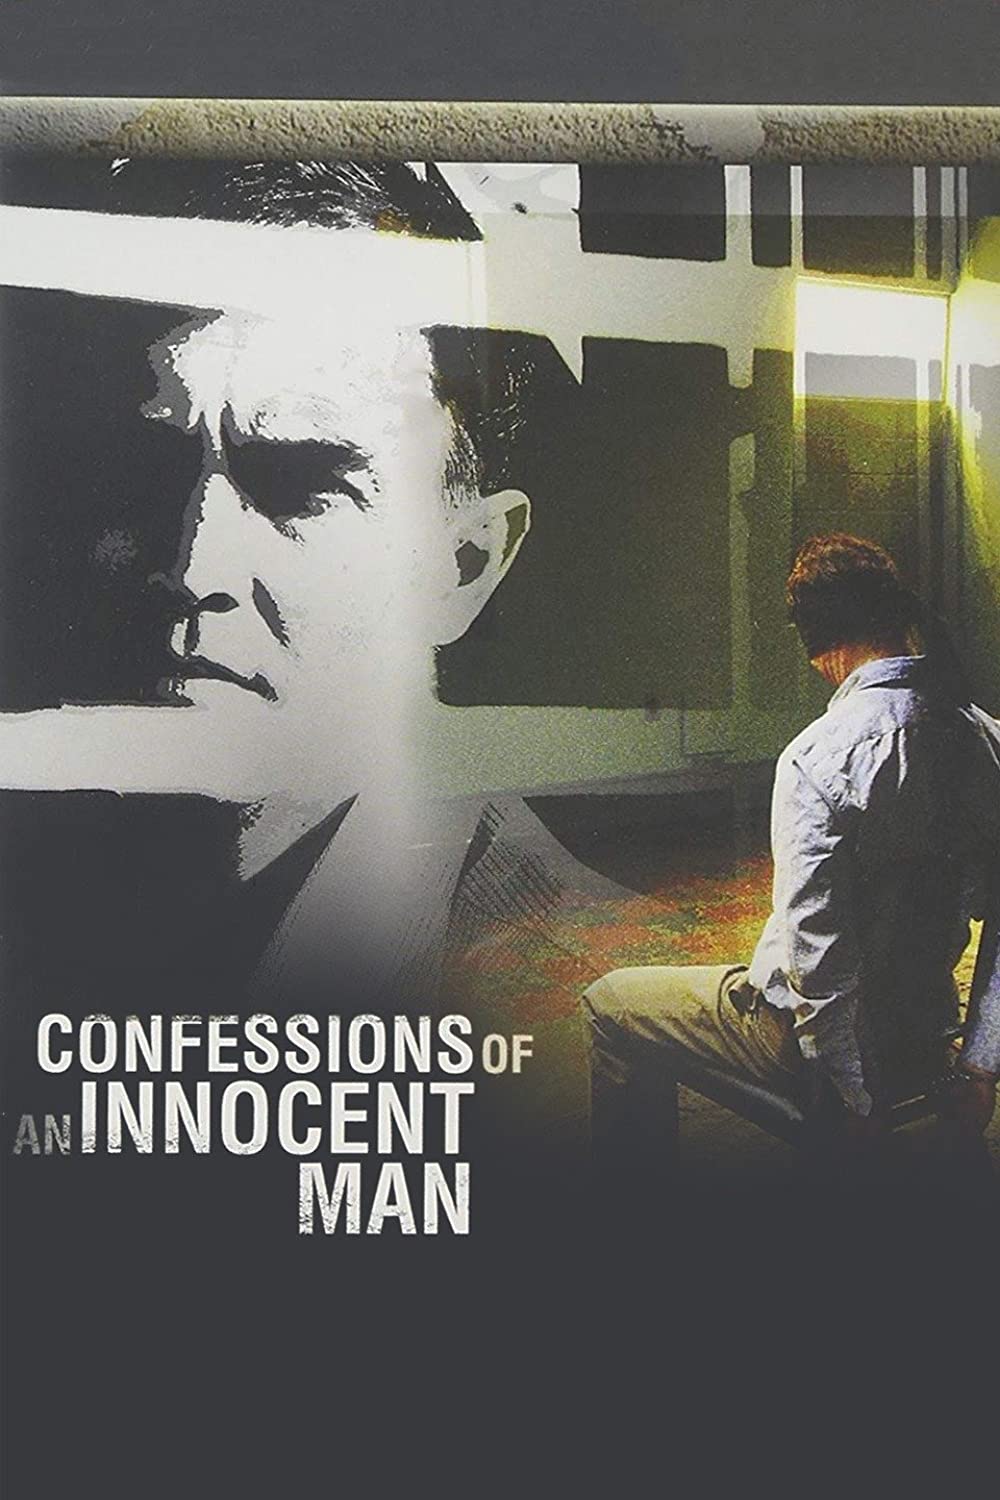 Download Confessions of an Innocent Man Movie | Confessions Of An Innocent Man Online